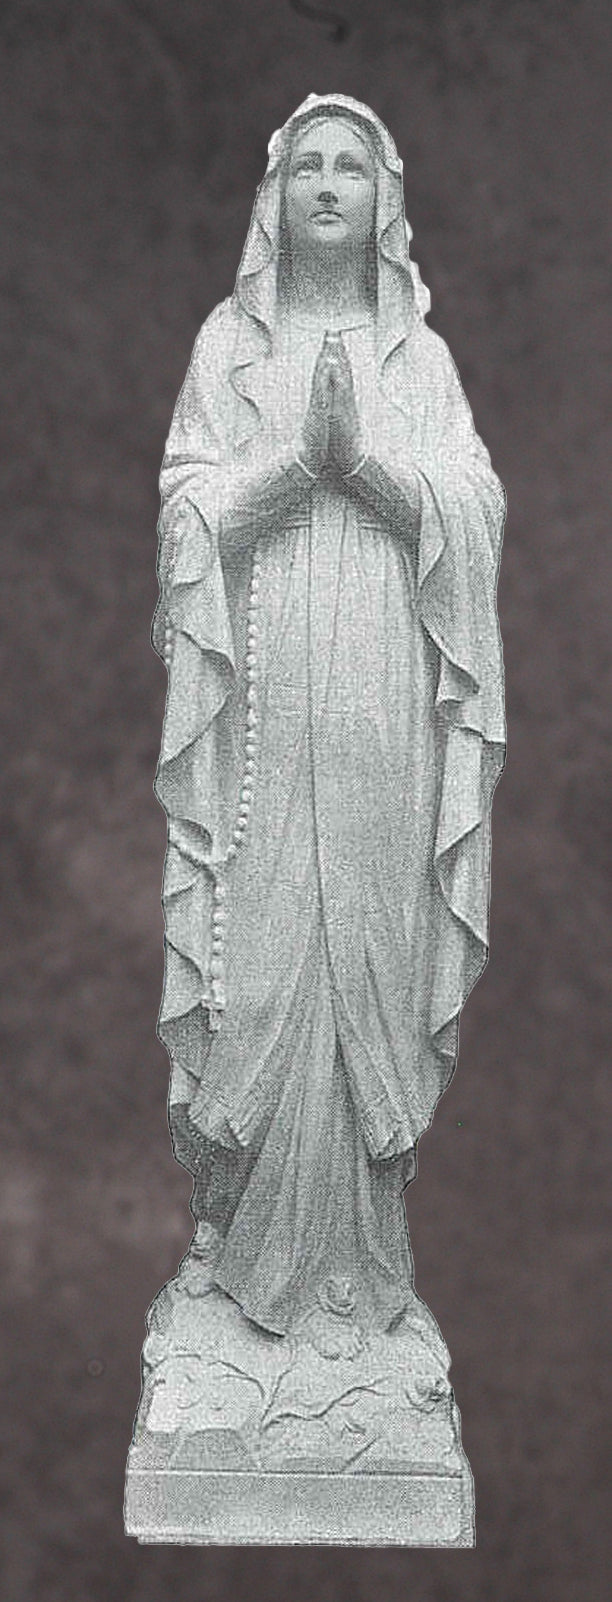 Our Lady of Lourdes Marble Statue Style 2 - 24”H